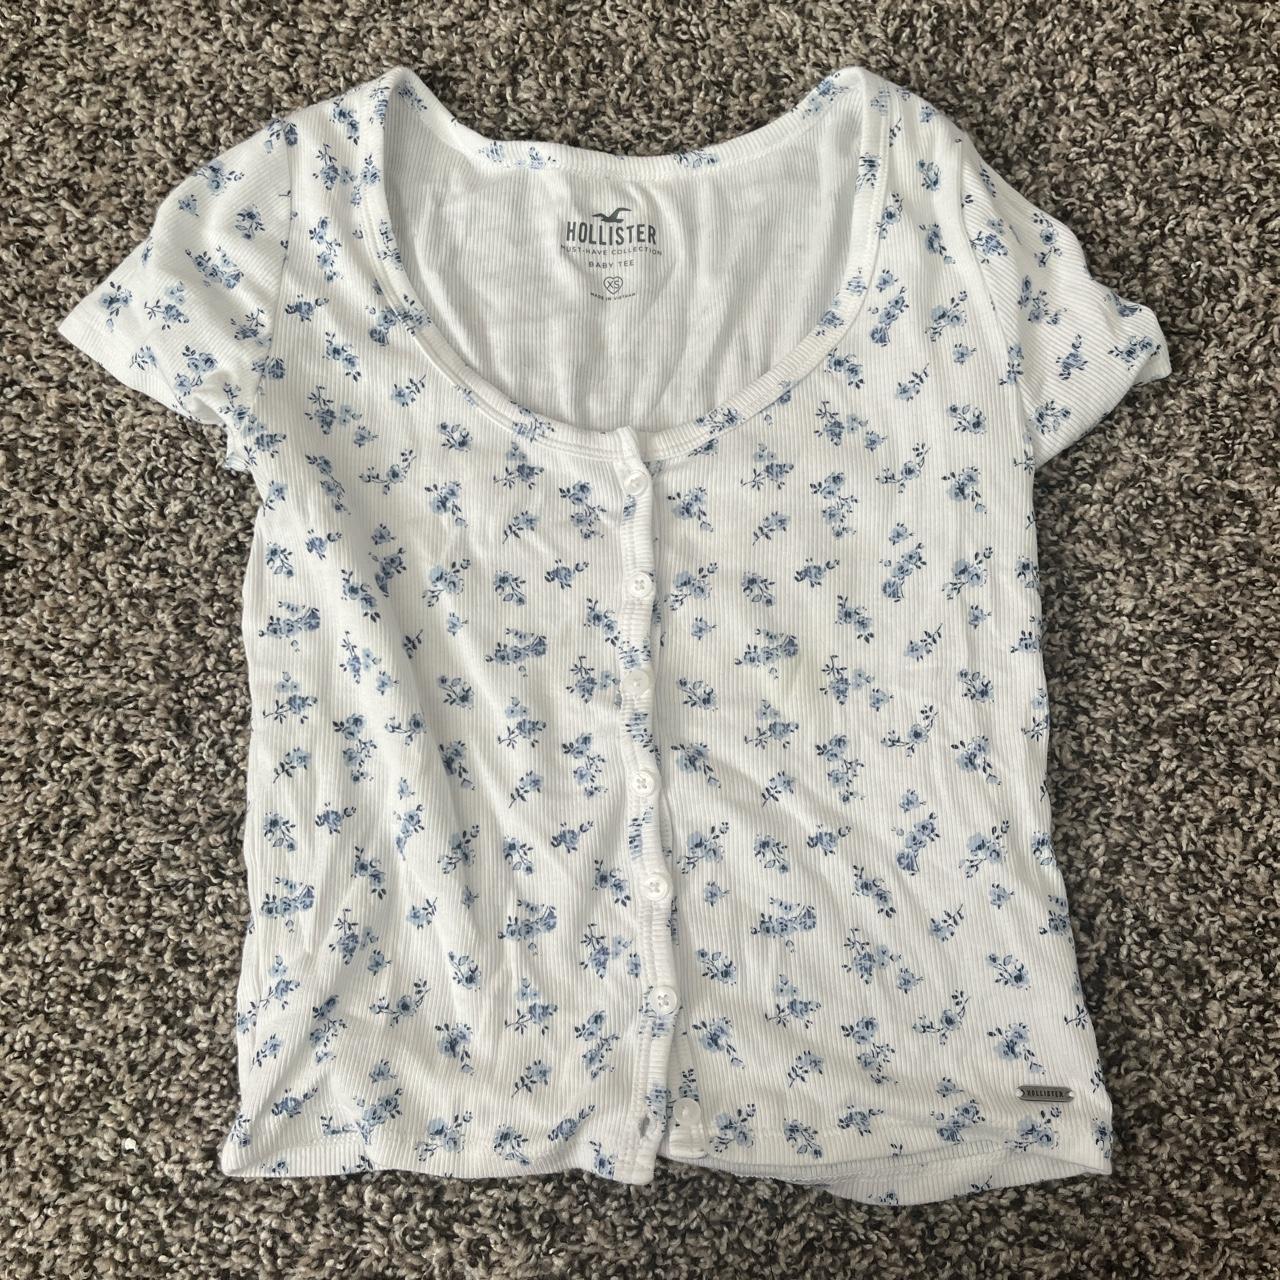 Hollister White Floral Baby Tee Size XS - $9 - From Heidi